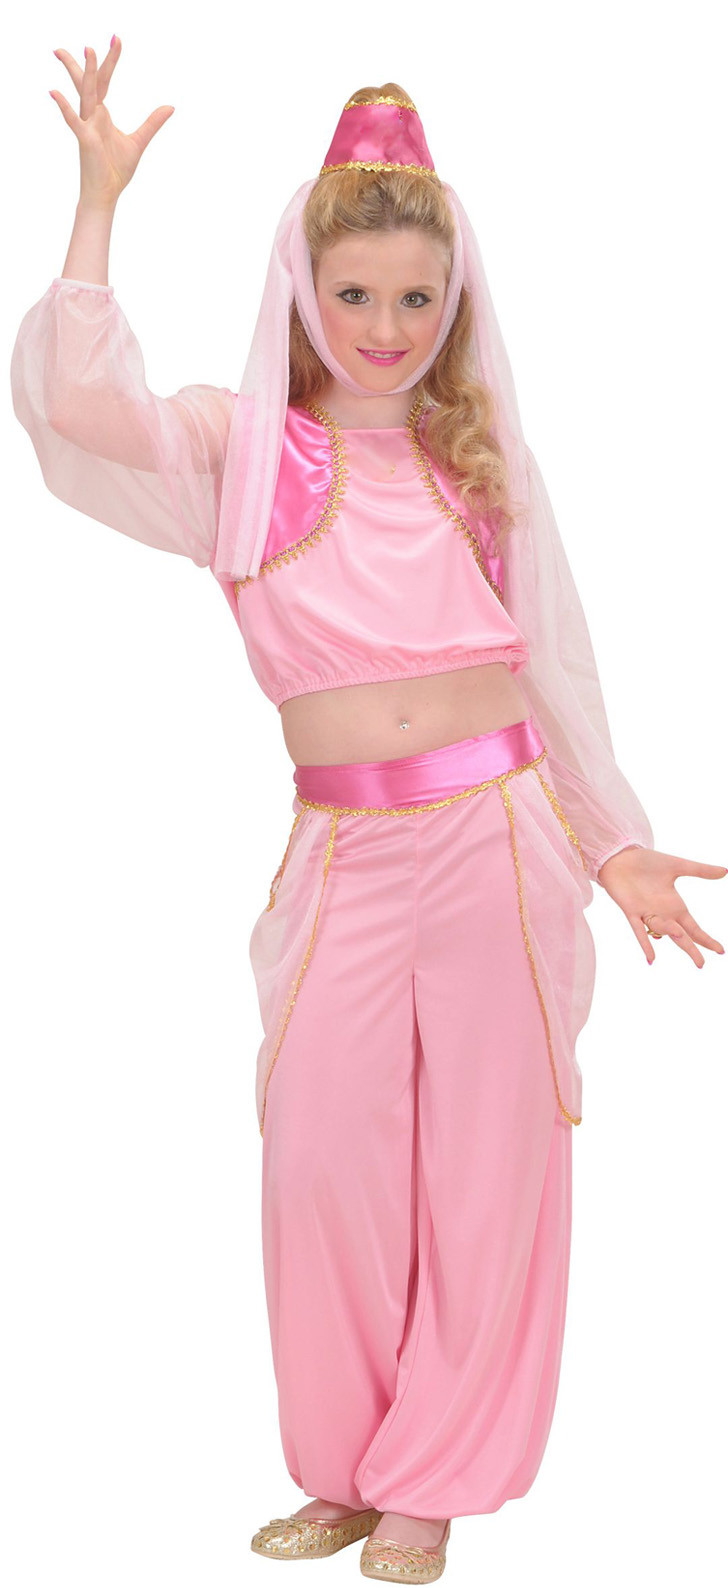 Genie Lamp Halloween Costume
 Genie from the lamp costume for girls N5986